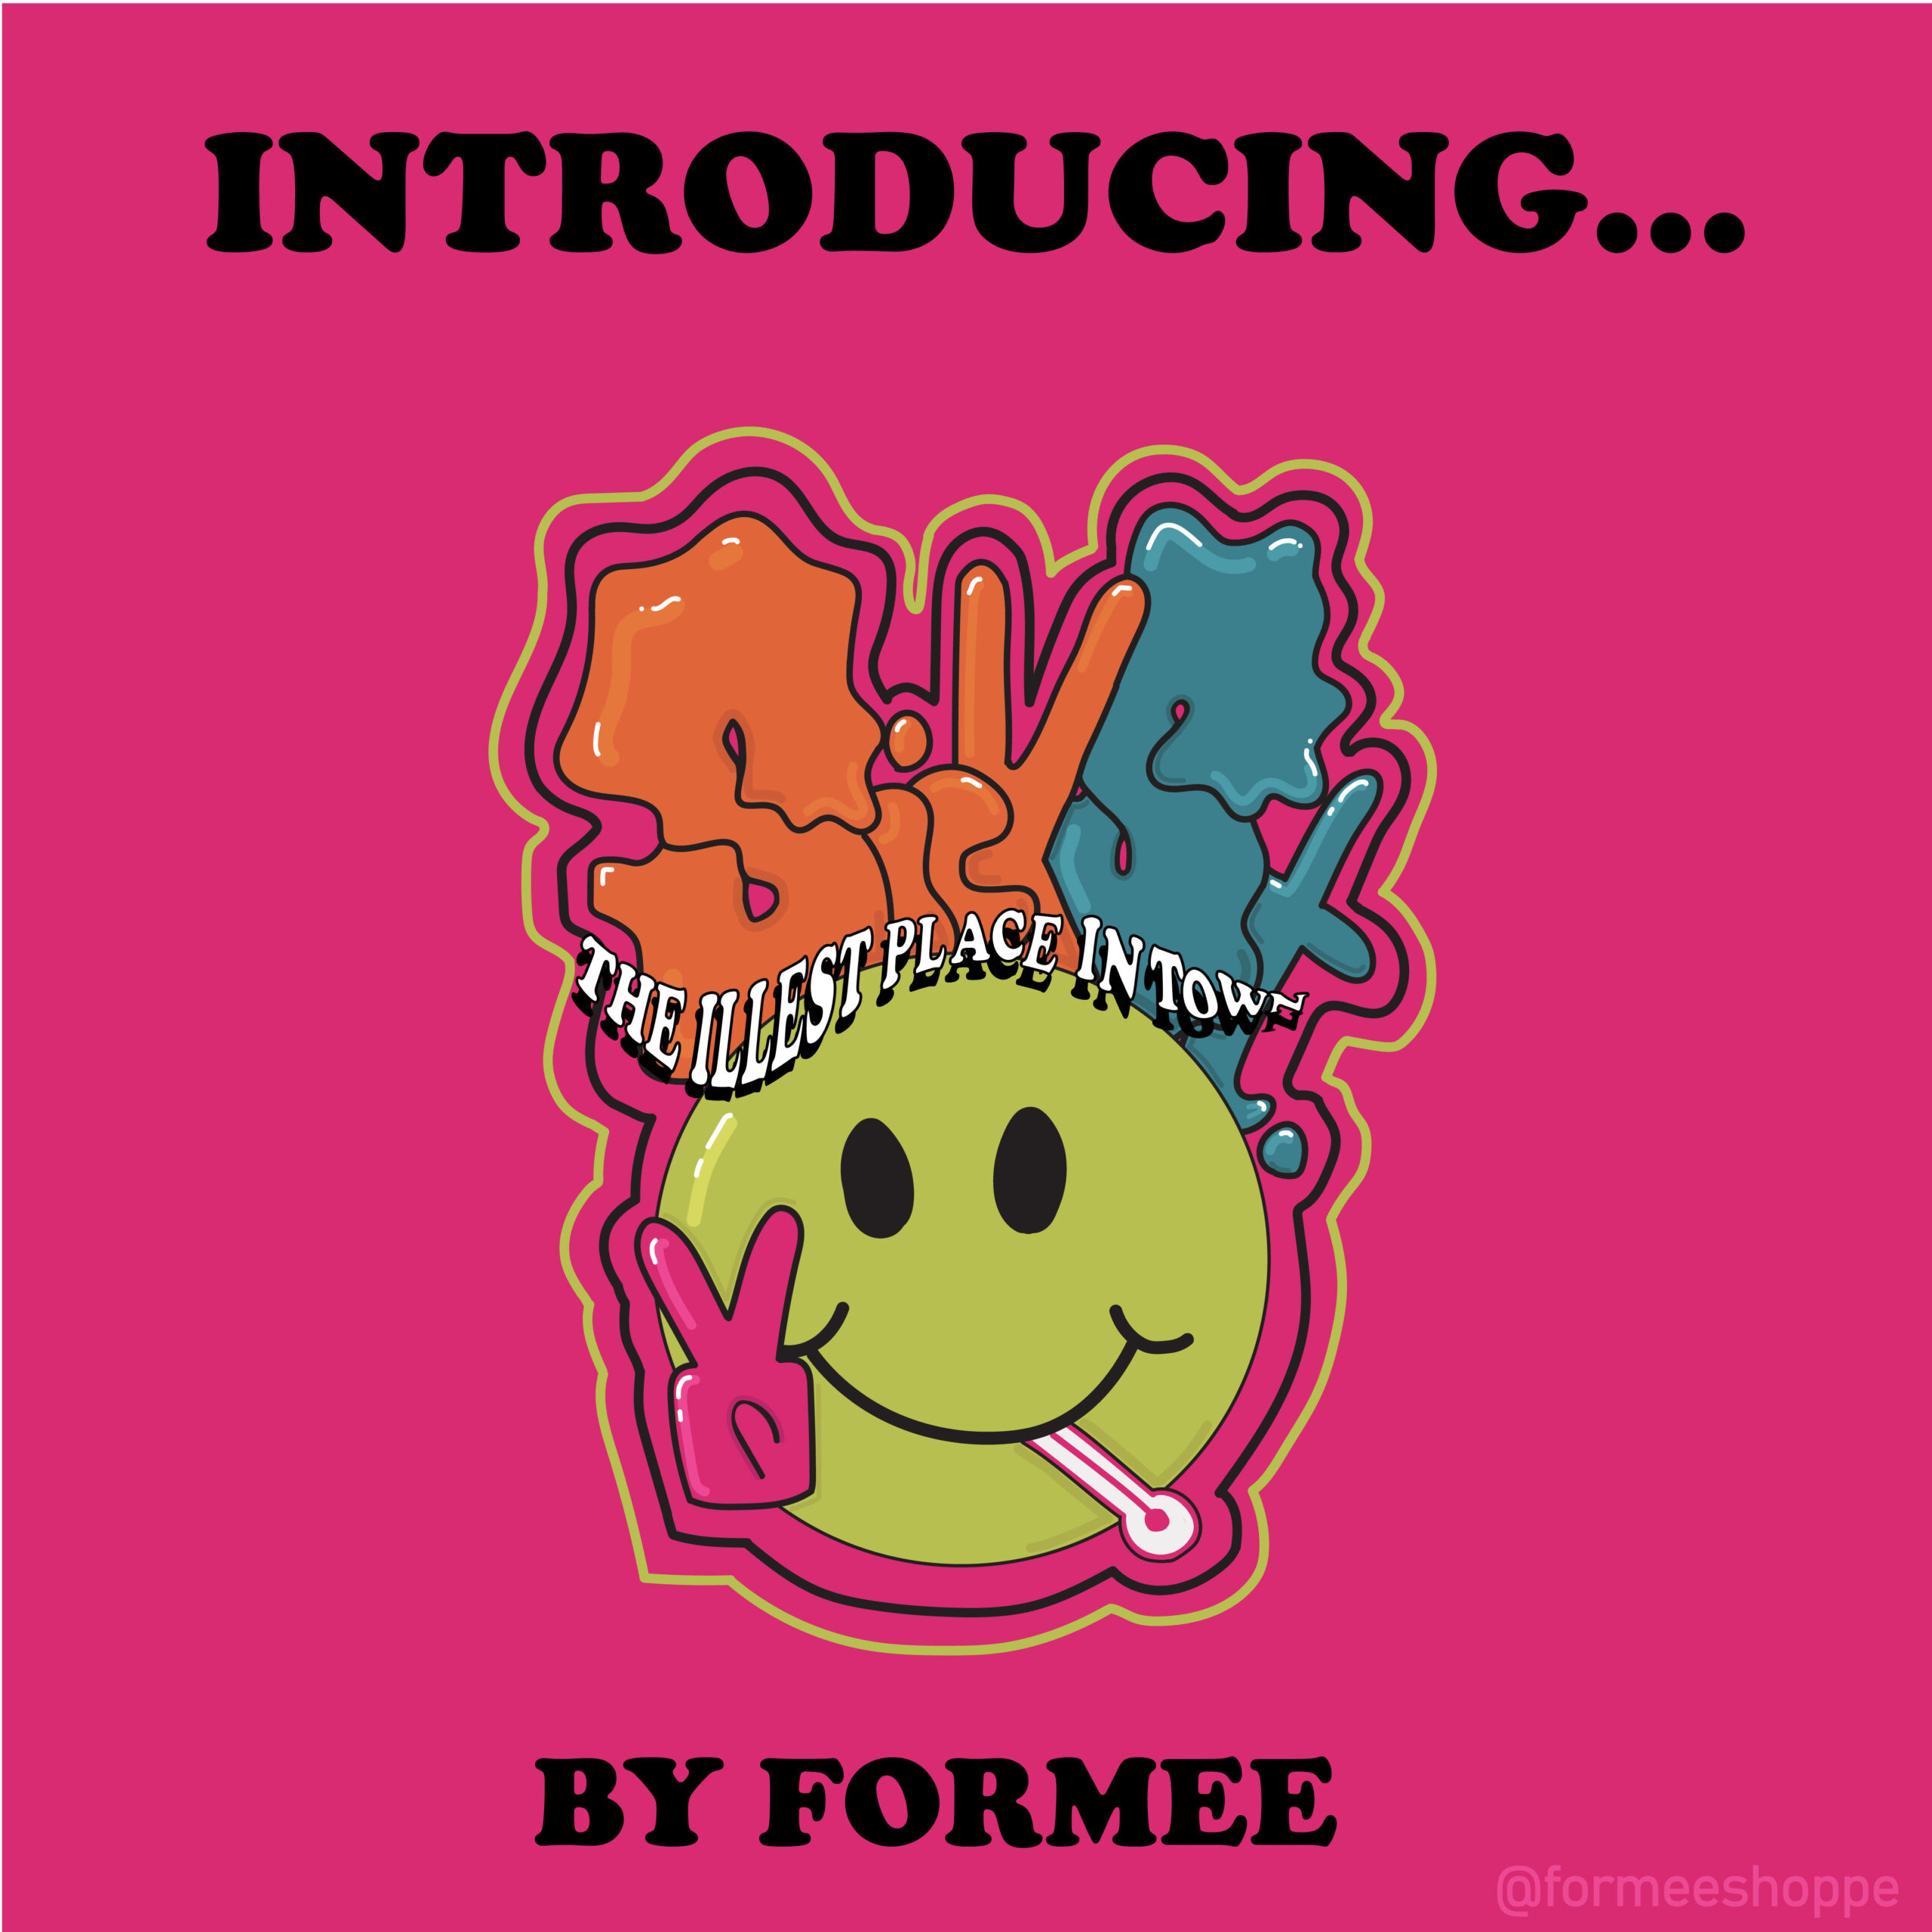 Social media launch of Sick St., Formee's in-house Street Wear label.